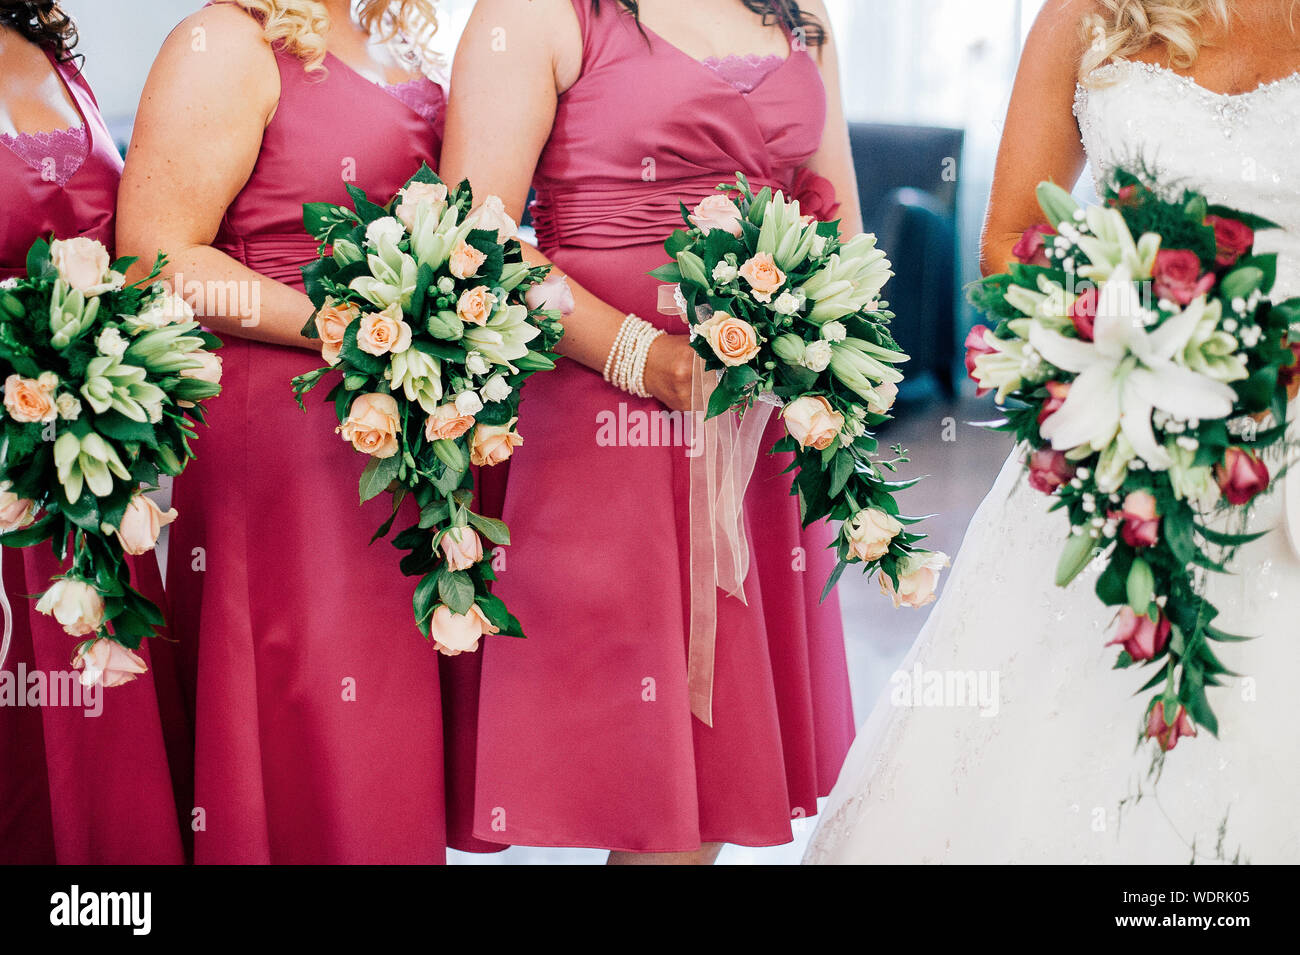 Bride And Bridesmaids Holding Flower Bouquets Stock Photo